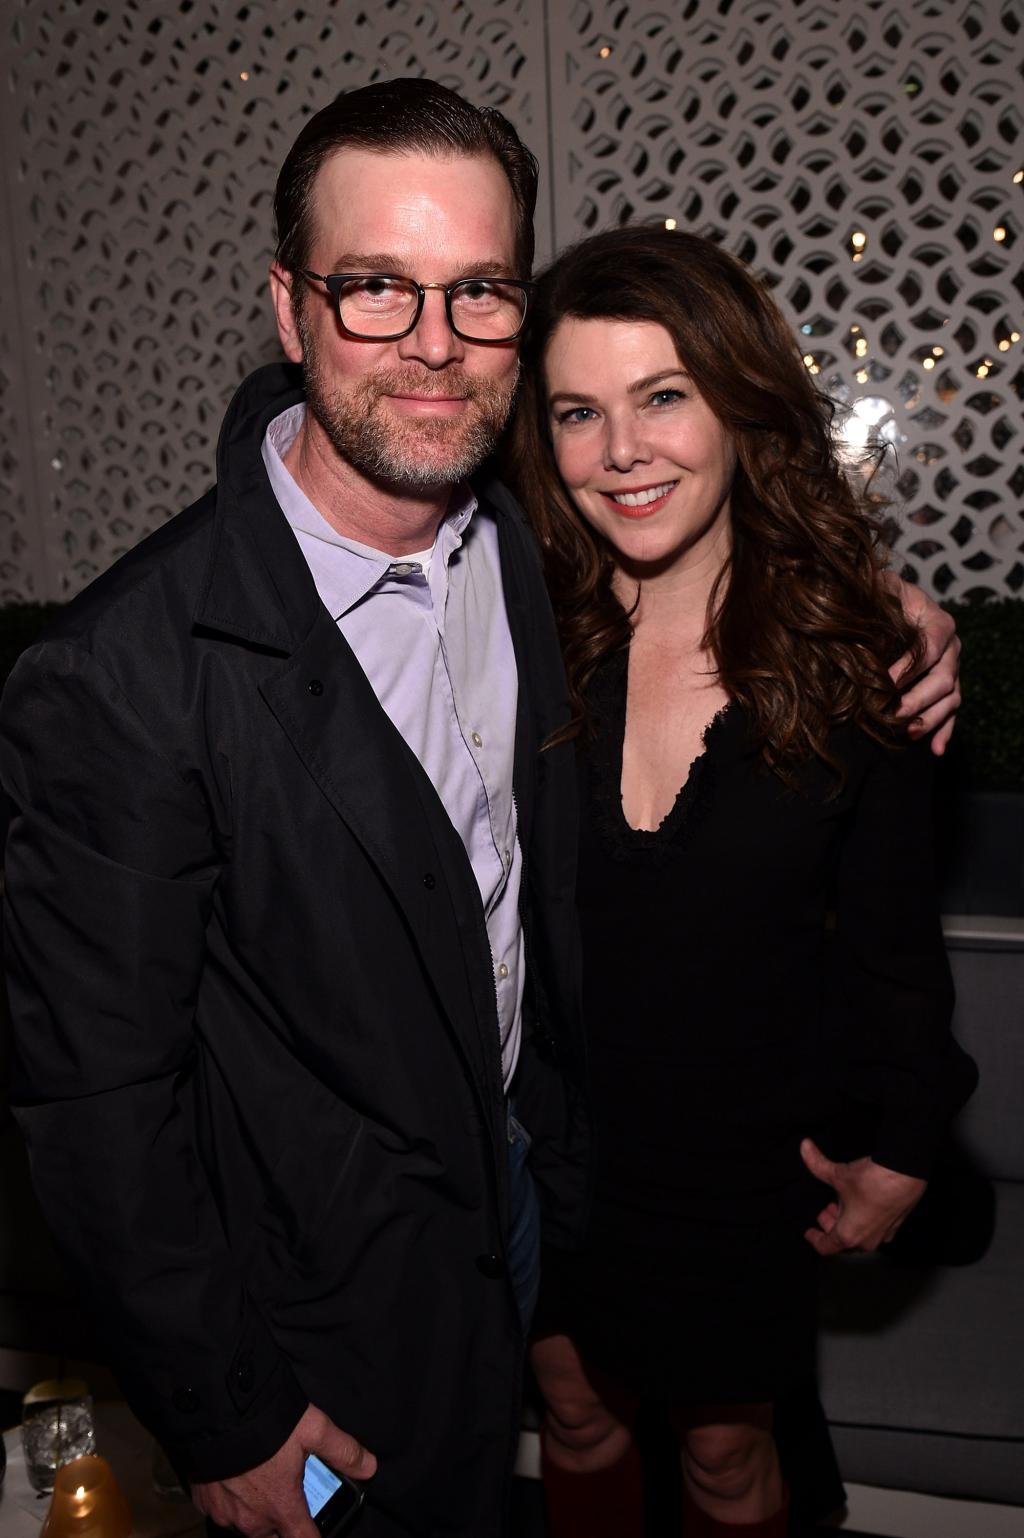 Lauren Graham Didn't Bother to Ask Peter Krause Any Serious Questions Prior to Their Relationship Taking Off